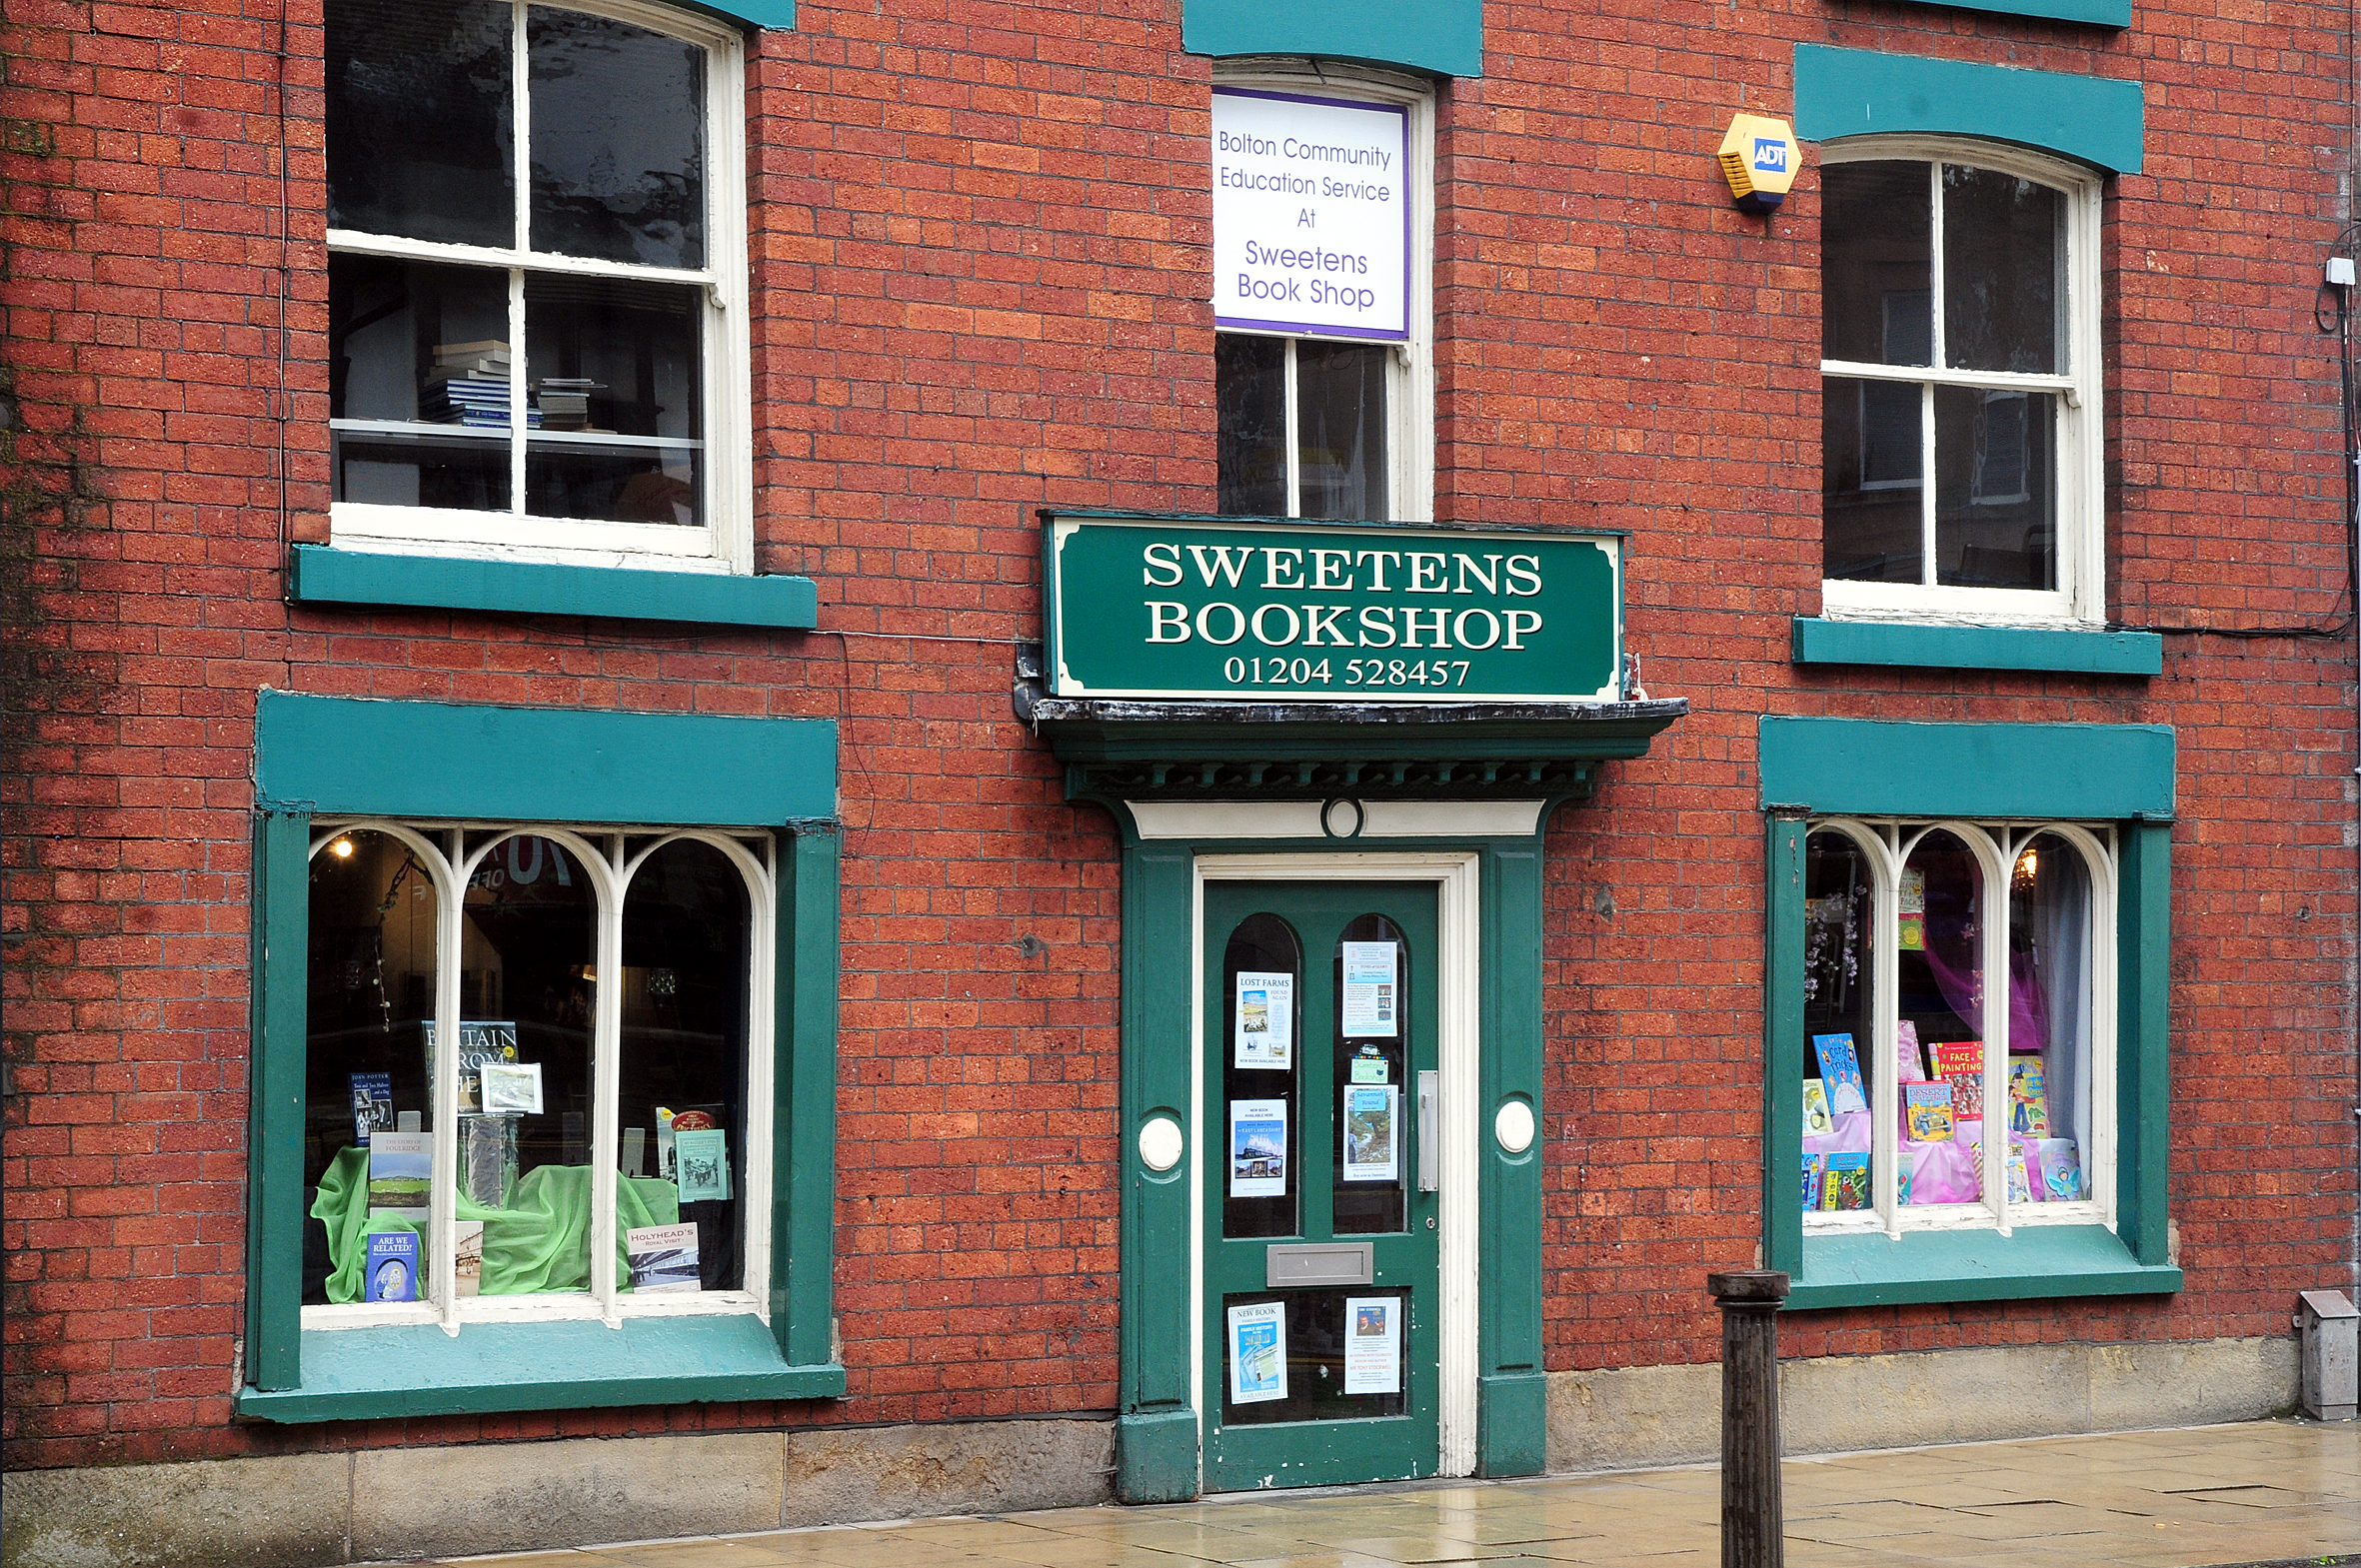 Plans unveiled to turn former Sweetens bookshop into armed forces support centre